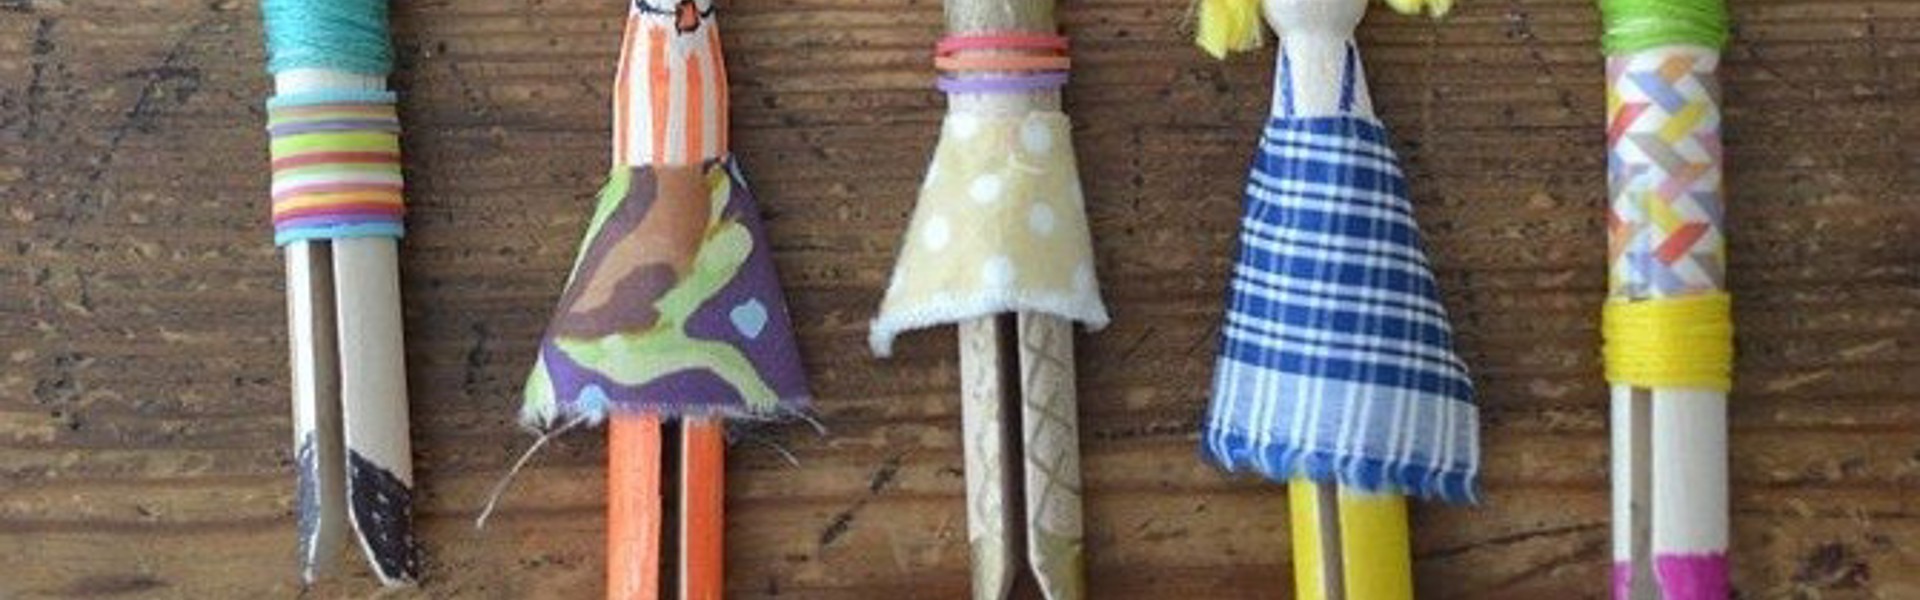 multicoloured peg dolls made from clothes pegs and scraps of fabric by Kate Nisbet